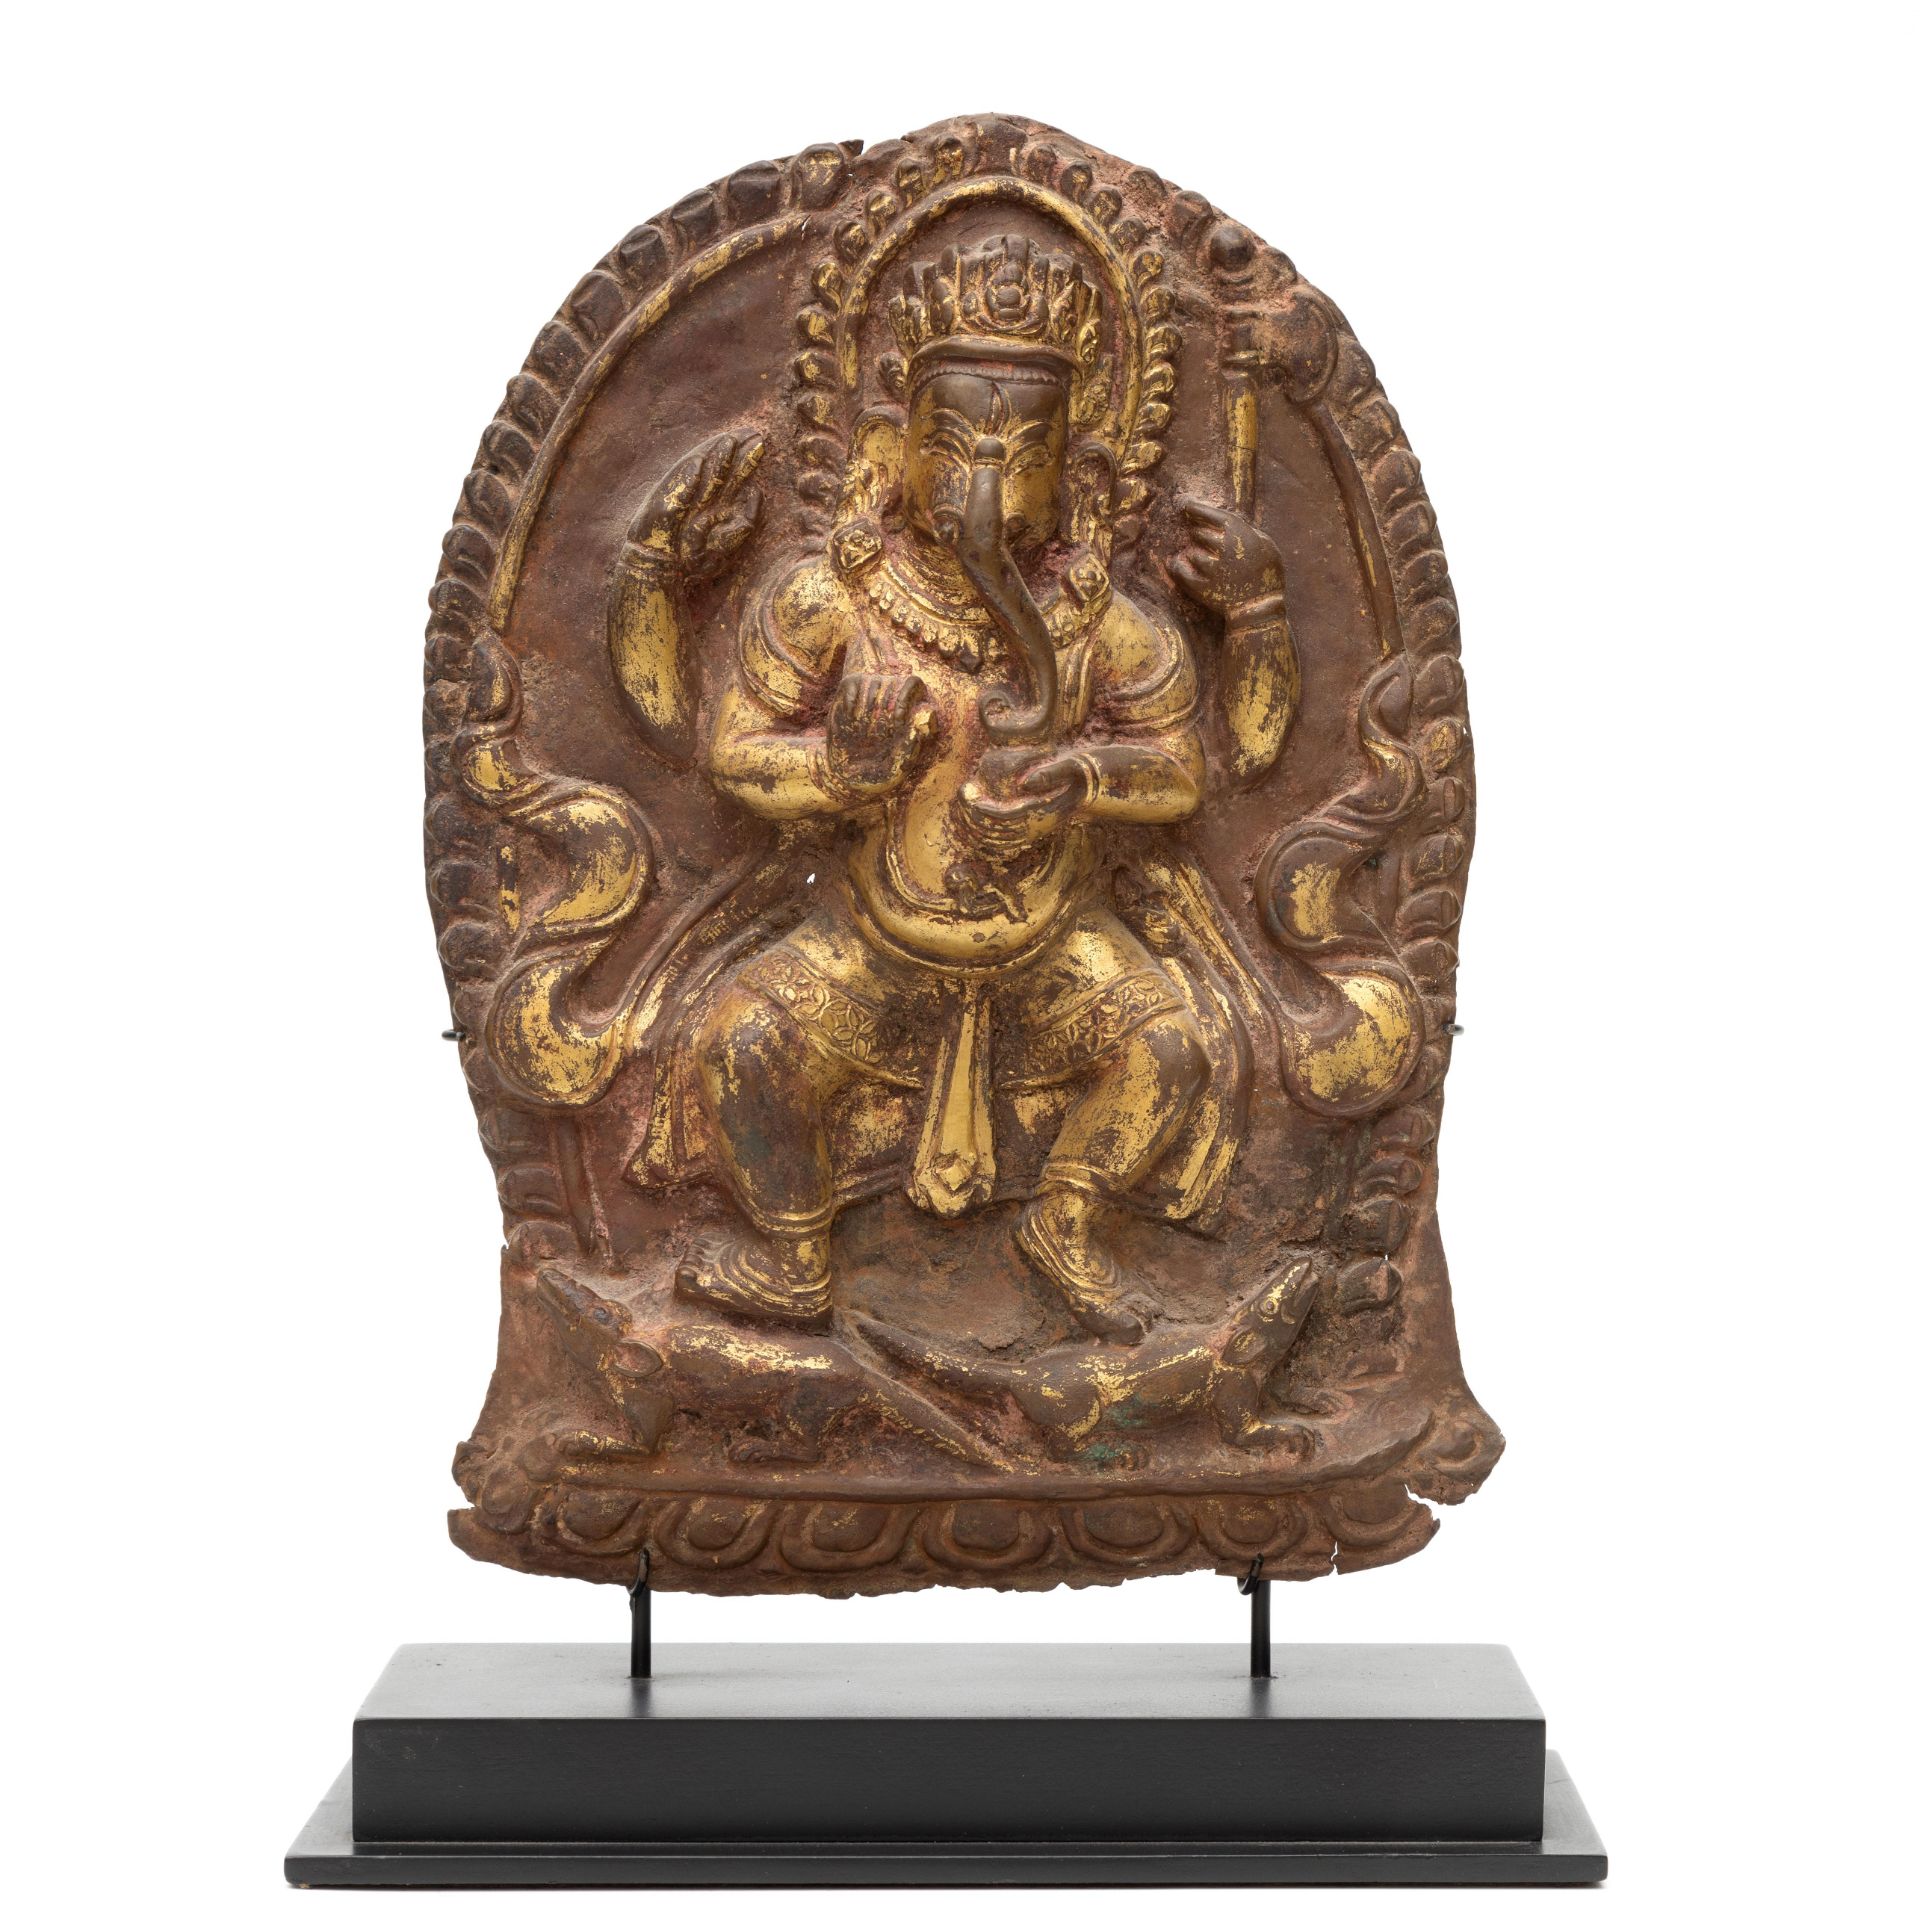 Nepal, a gild copper alloy repousse plaque depicting a standing Ganesha, 17th-18th century